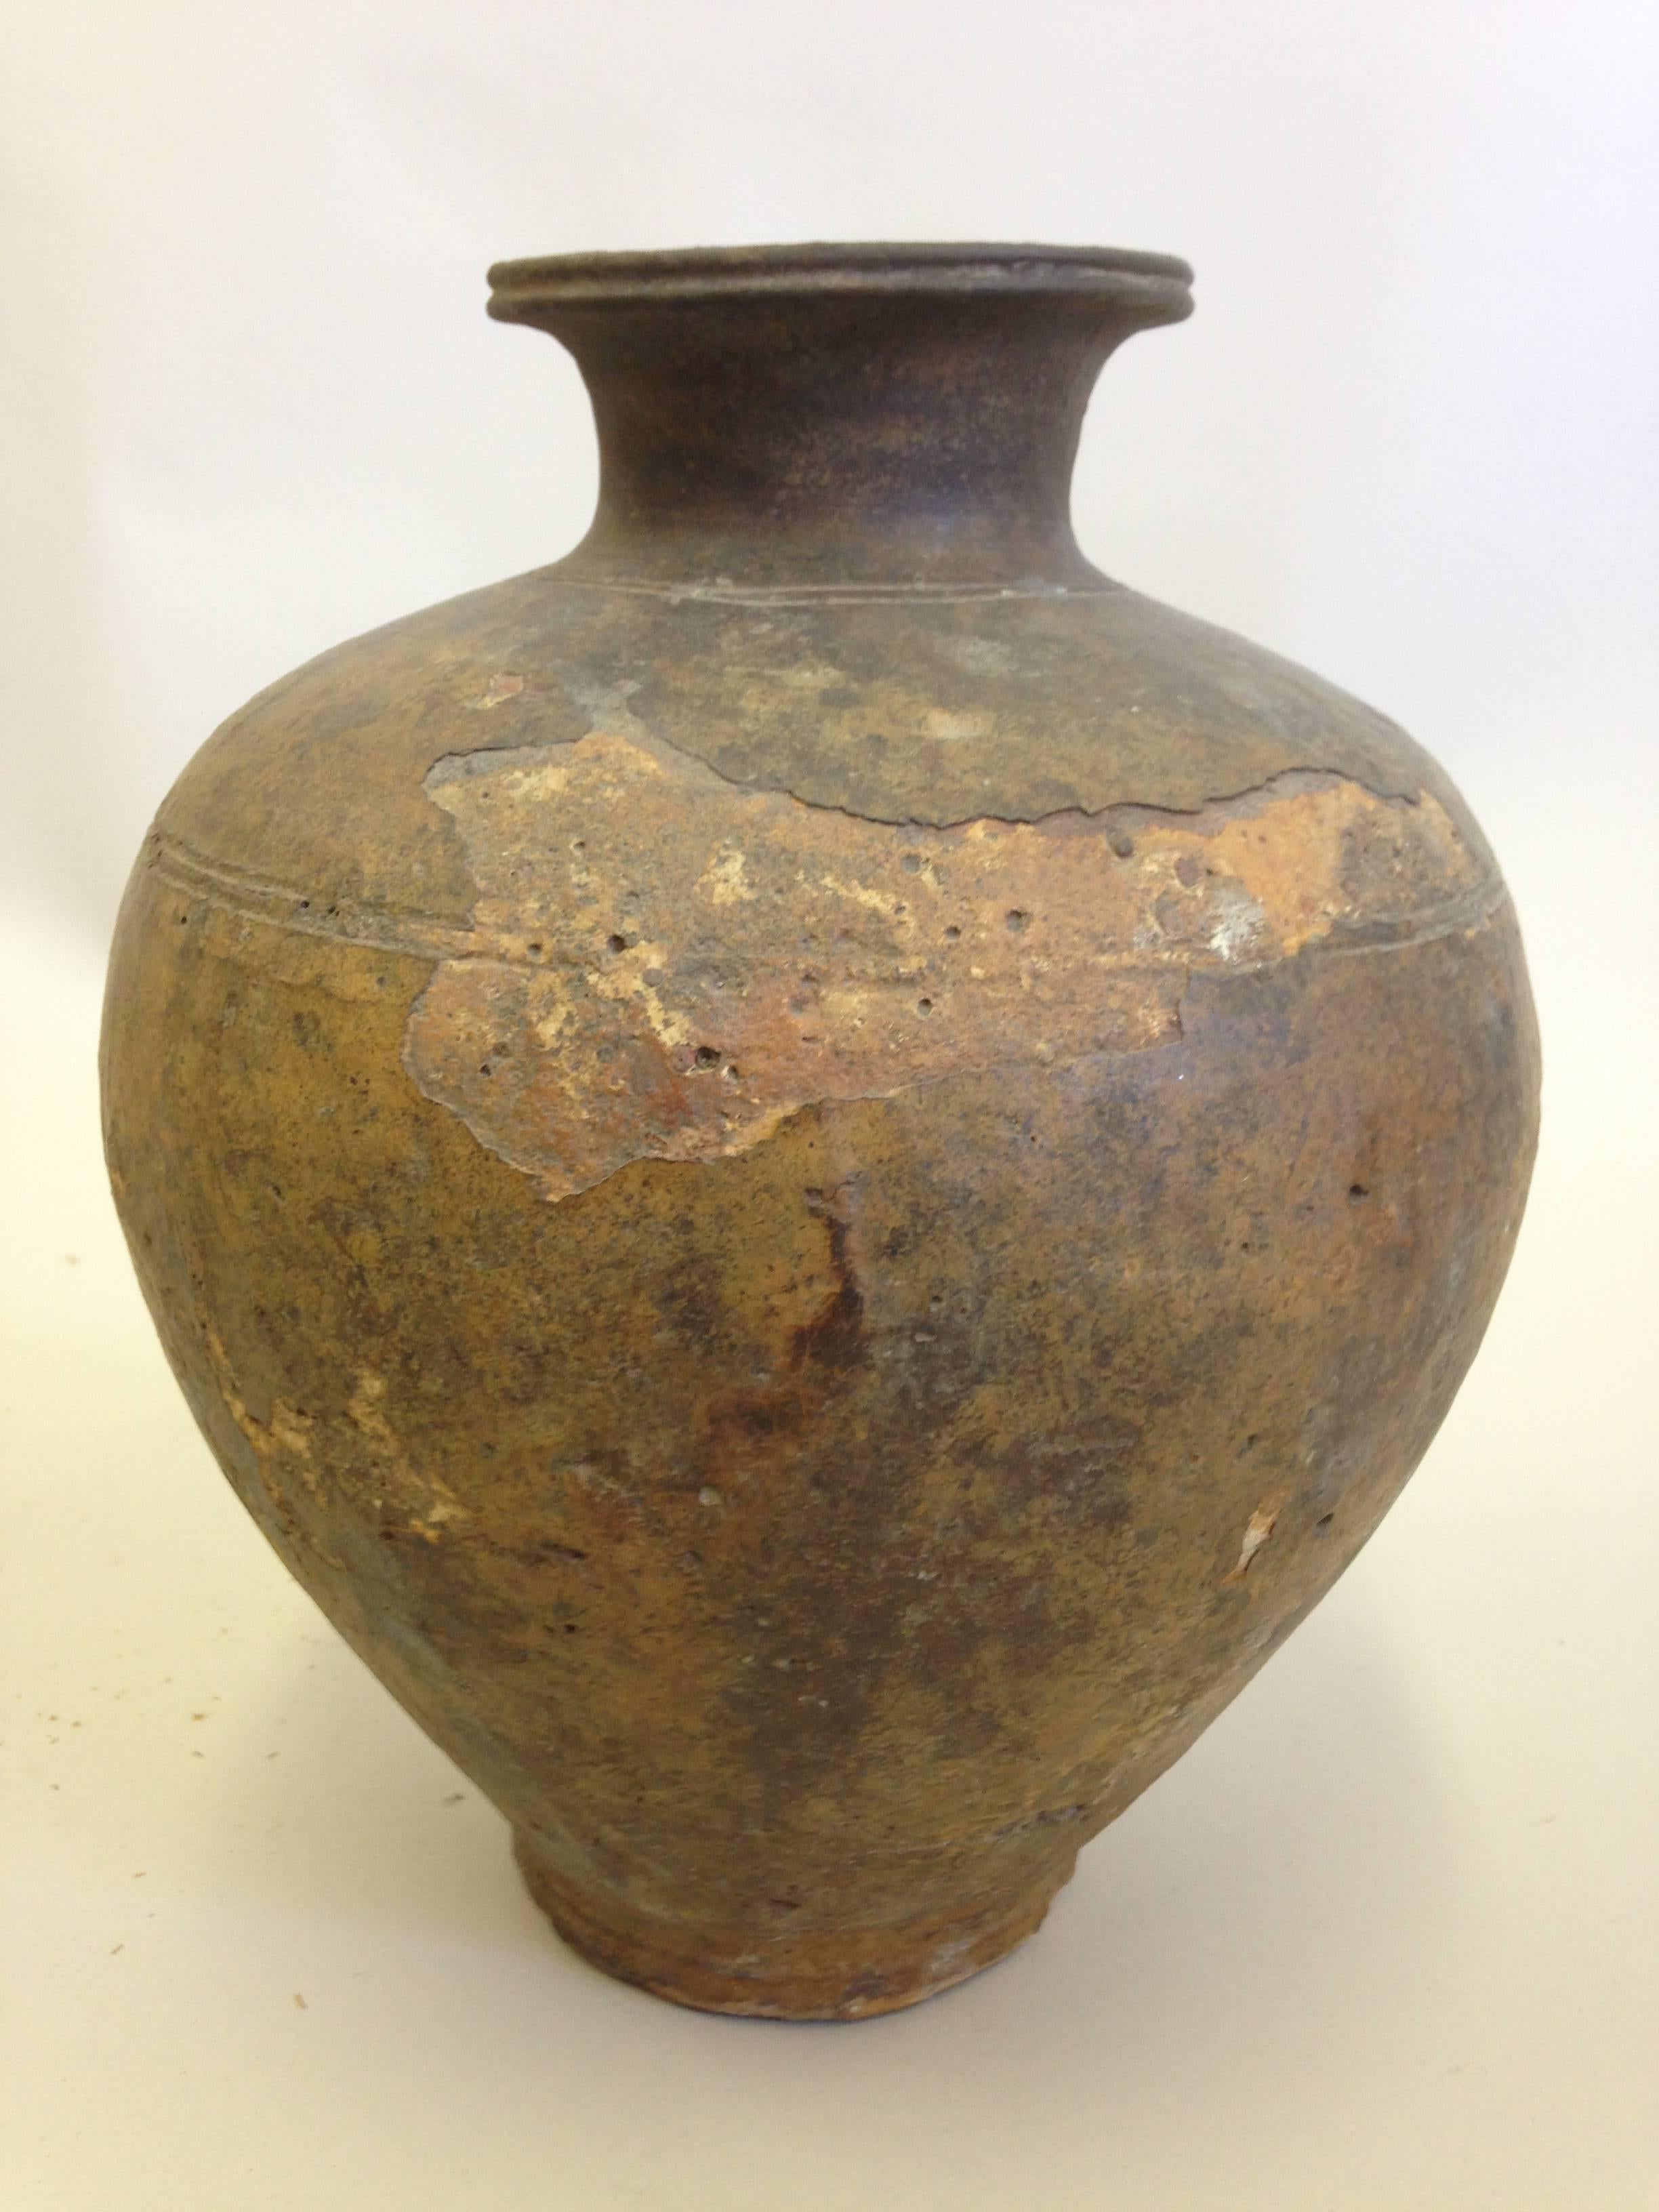 Large ancient Khmer Urn or Vase in a sober, Classic form. The piece has varied and beautiful coloration due to the effect of time, humidity and weather on the clay structure. 

Khmer pieces highlight modern and traditional environments because of